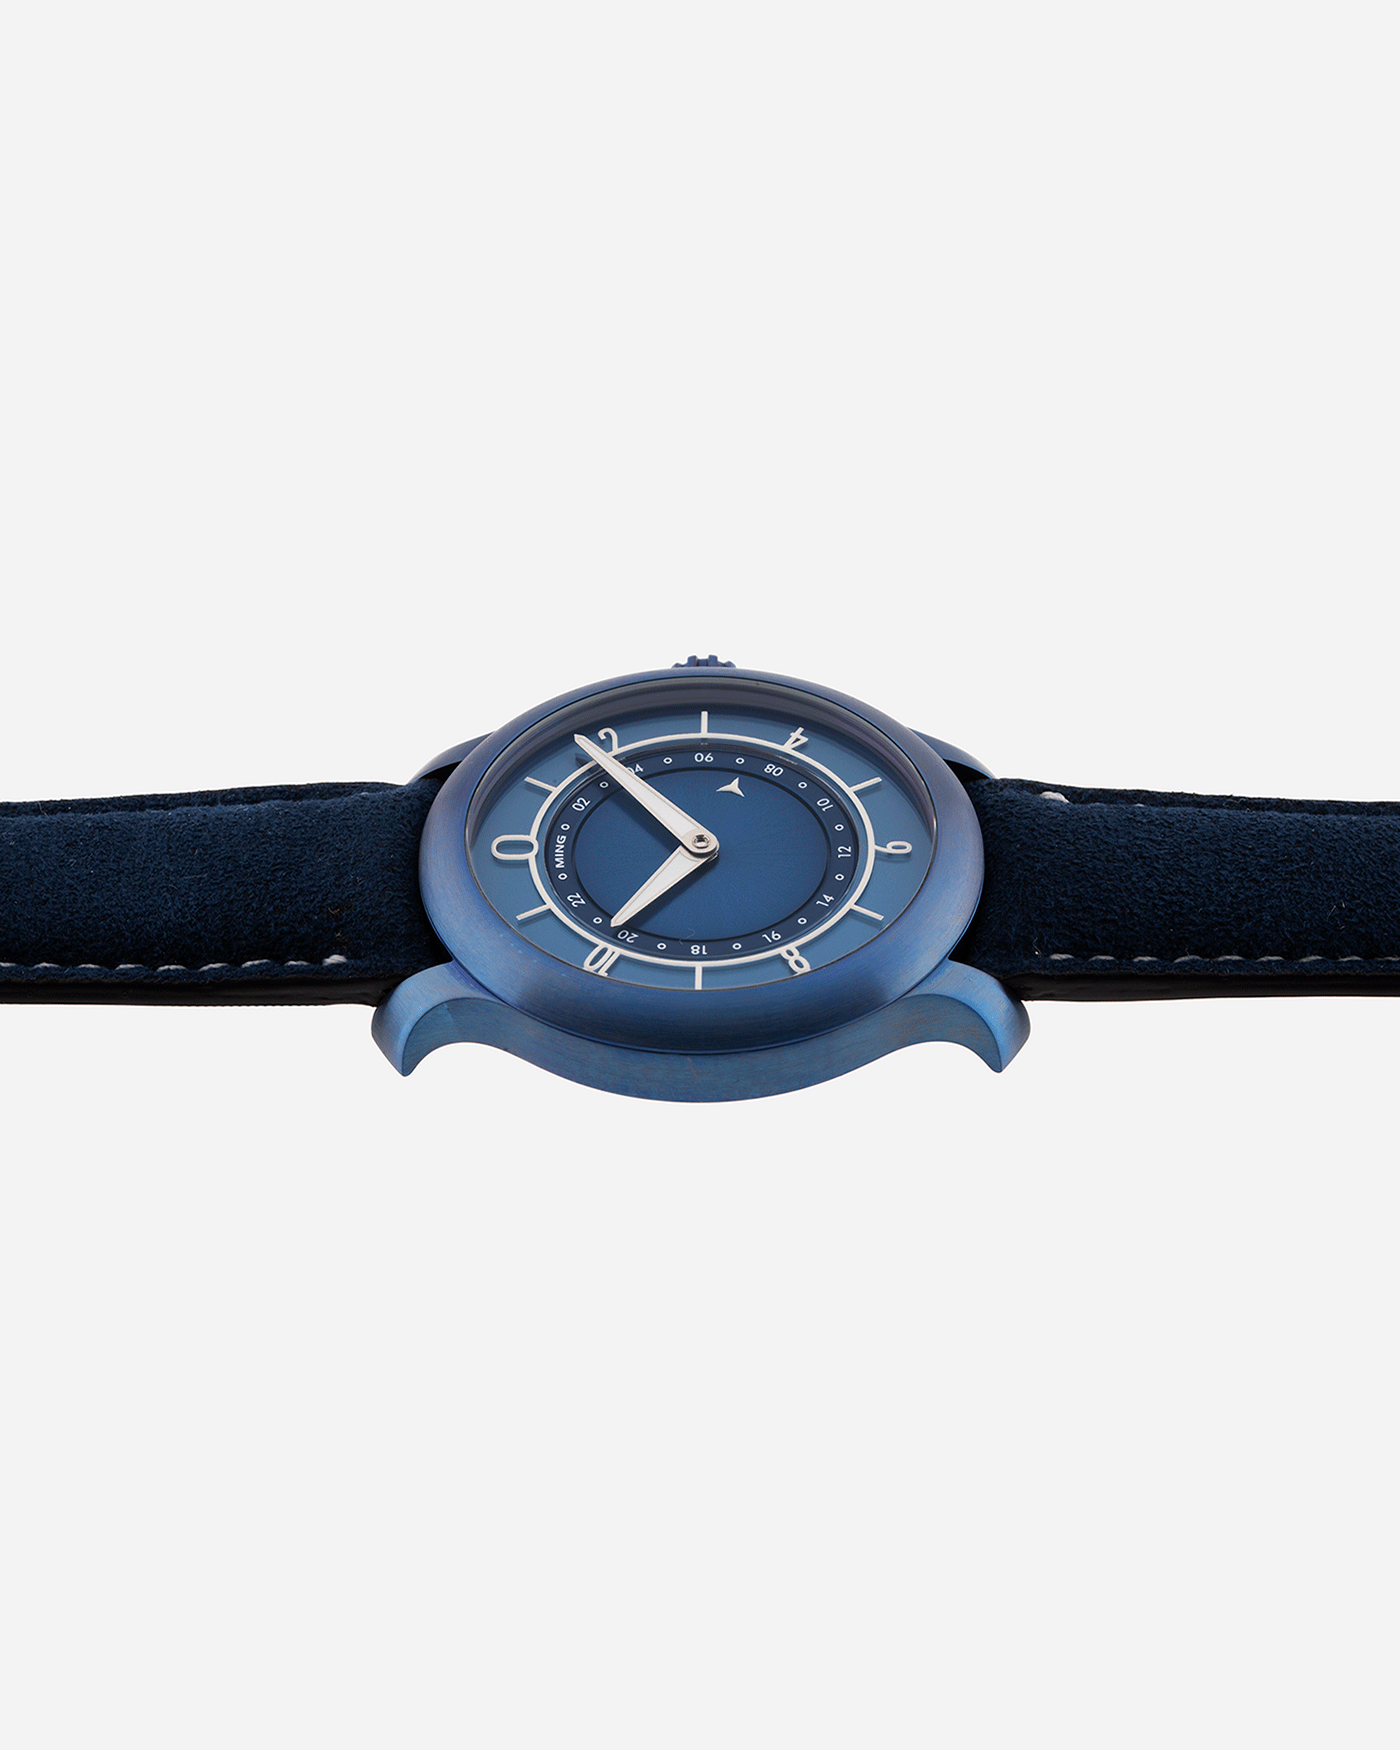 Brand: Ming Year: 2018 Model: 17.03 Material: Grade 2 Titanium Movement: Self-Winding Sellita SW 330-1 Case Diameter: 38mm Strap: Ming Blue Suede Strap and Grade 5 Ultra Blue Titanium Tang Buckle